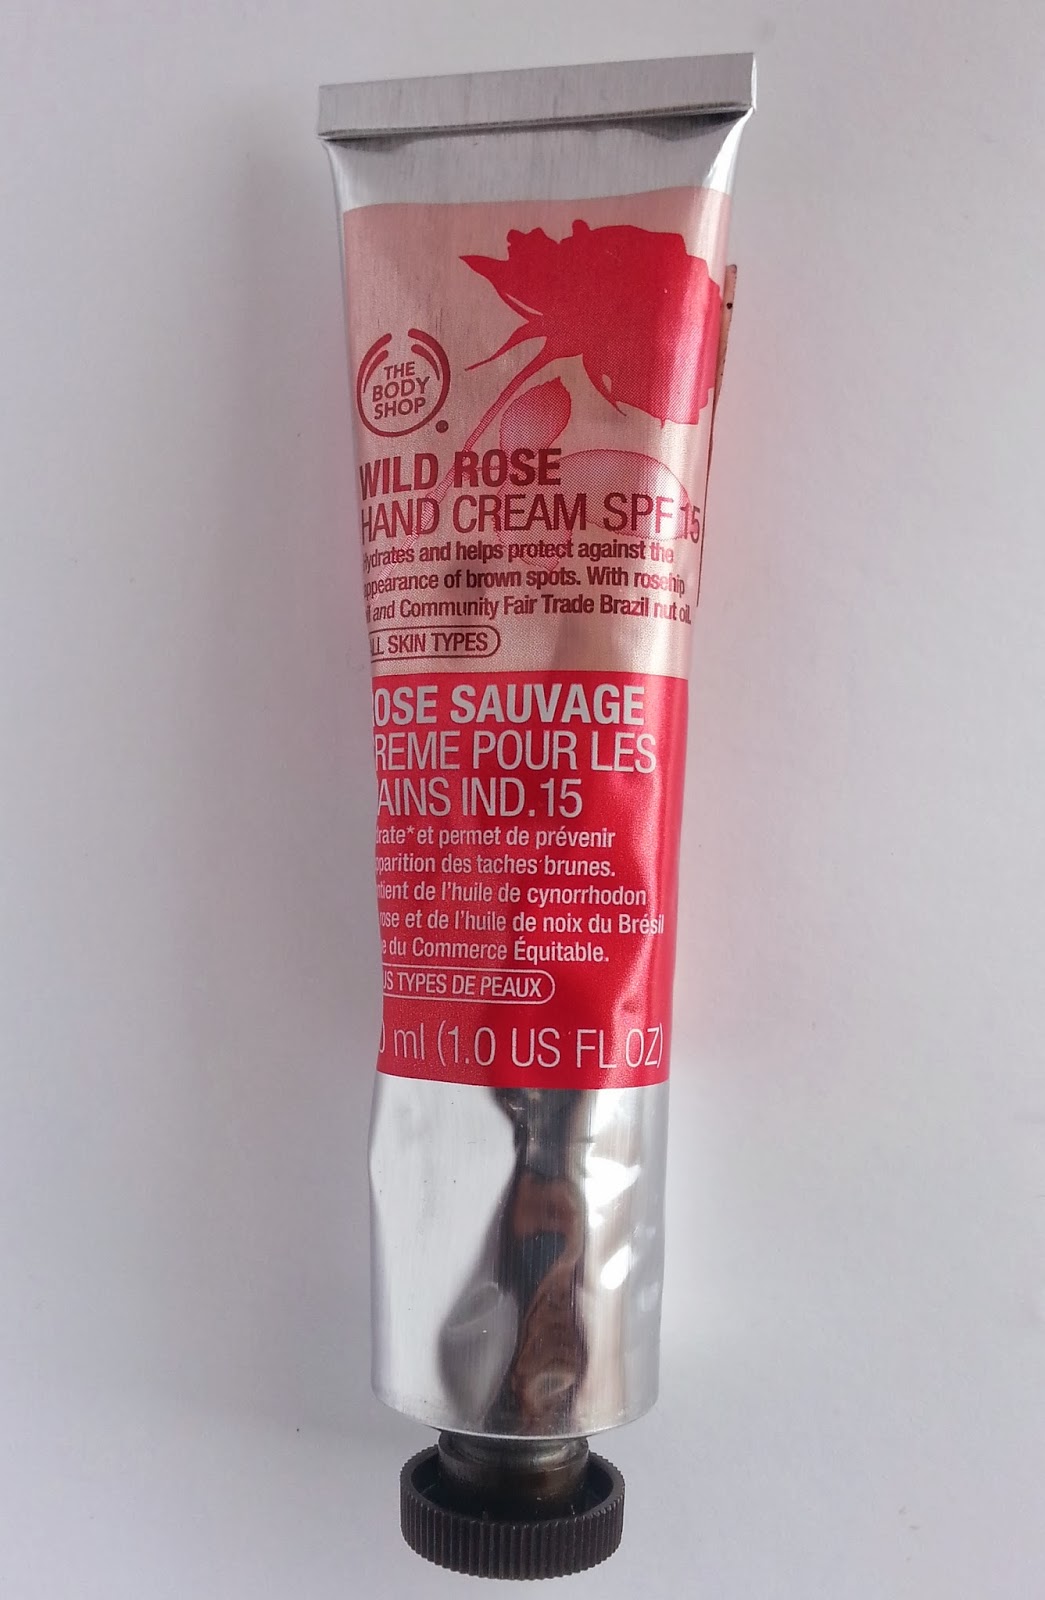 A Chick With Review #11: The Body Shop: Wild Rose Hand Cream SPF 15